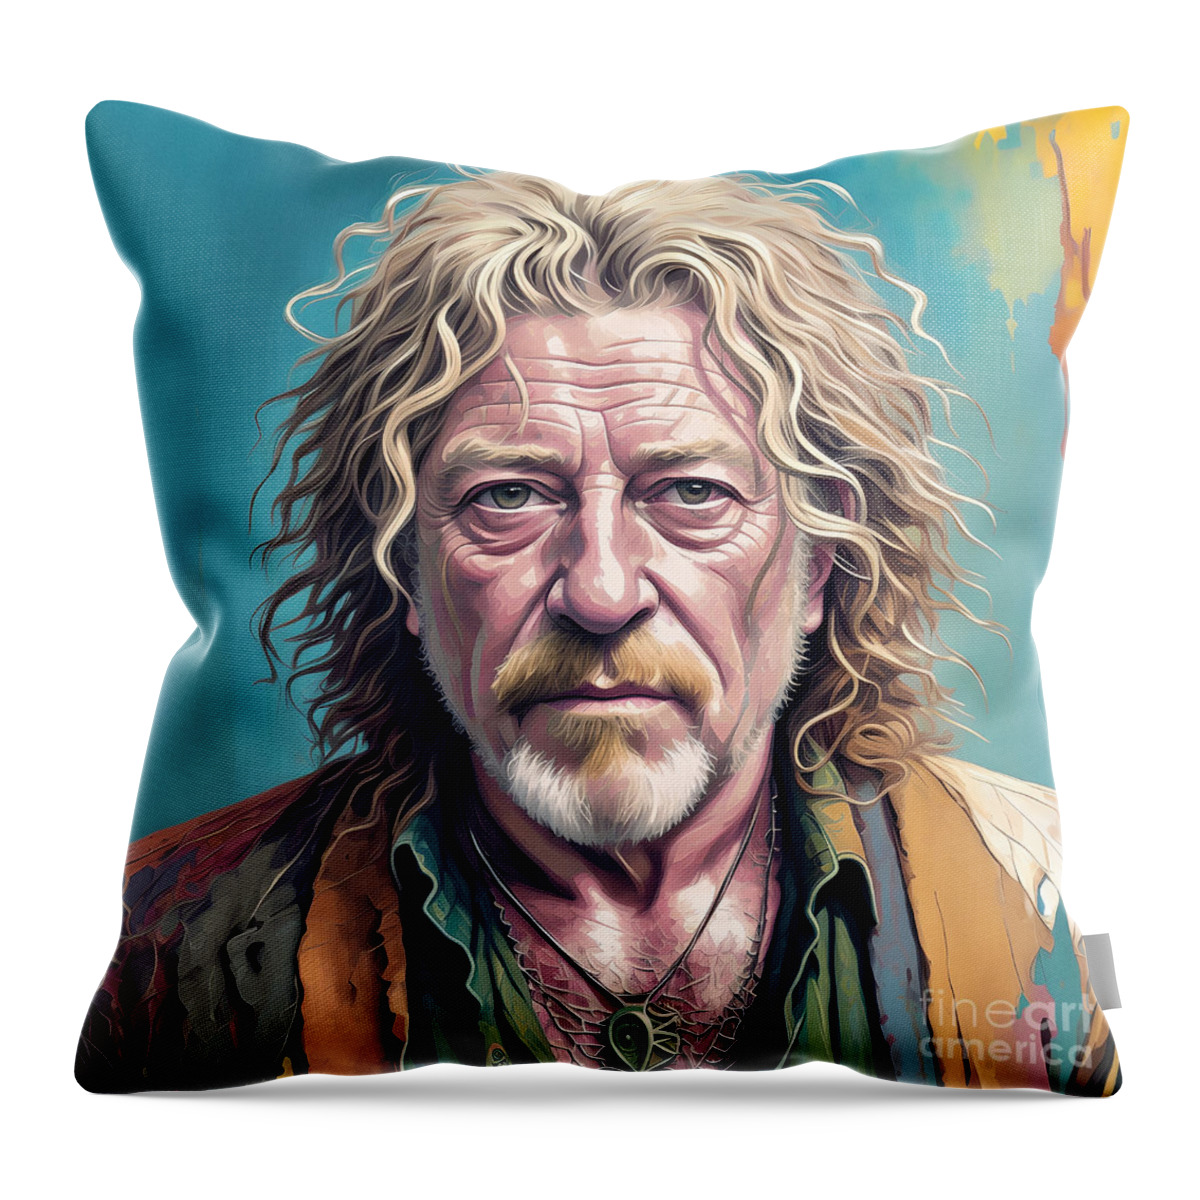 Abstract Throw Pillow featuring the digital art Celebrity Portrait - Robert Plant by Philip Preston